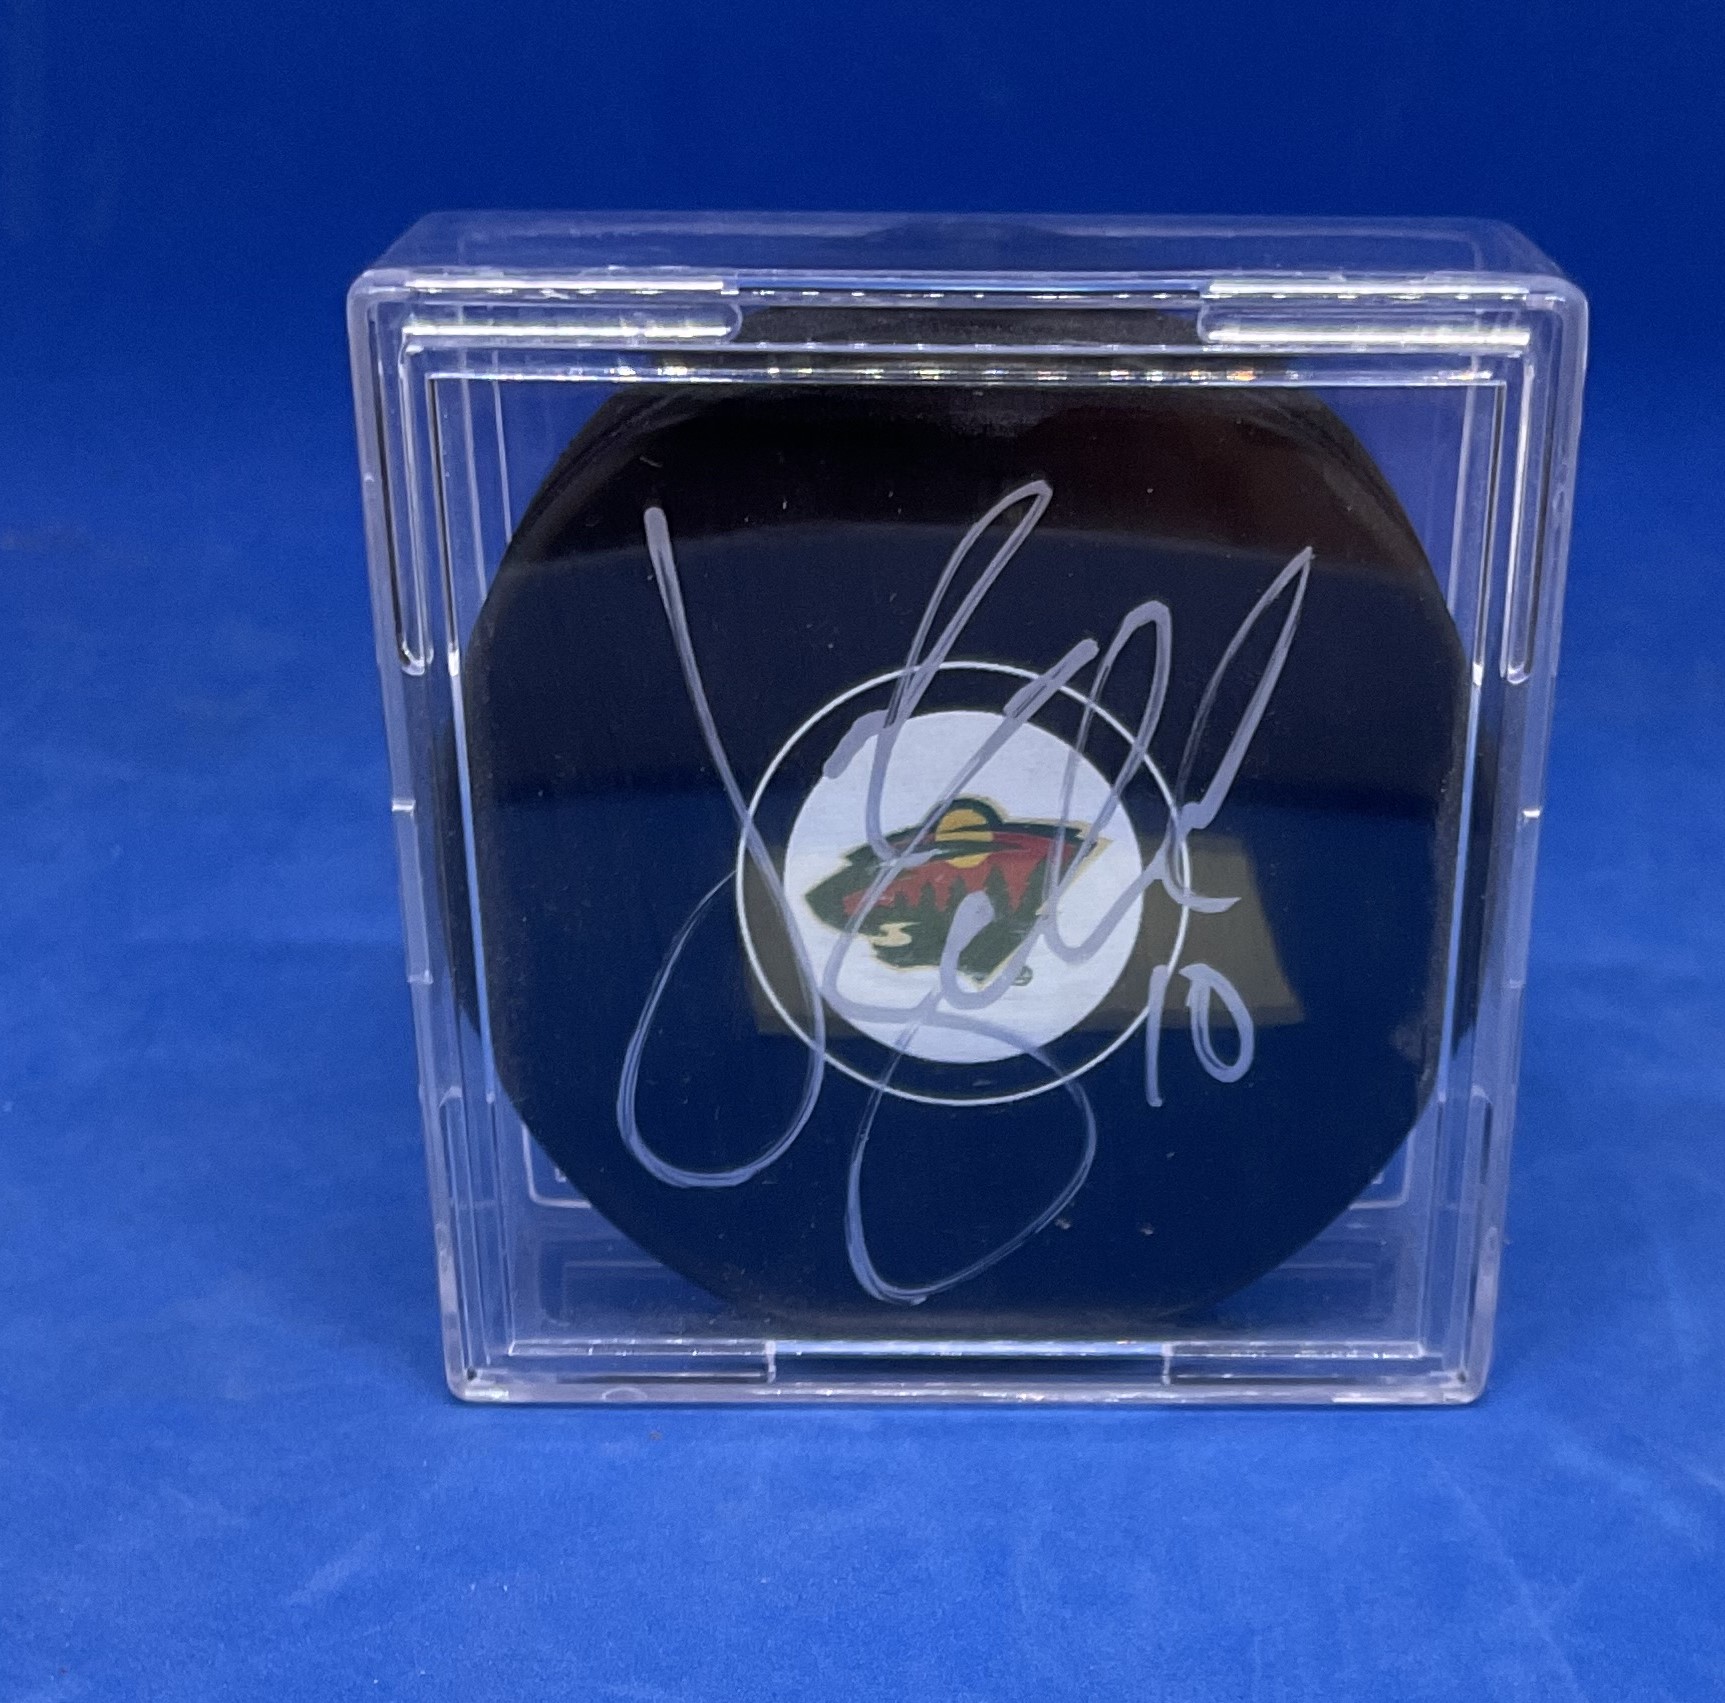 American Ice Hockey Player Jordan Schroeder Signed Official NHL Puck. Signed in silver ink. Housed